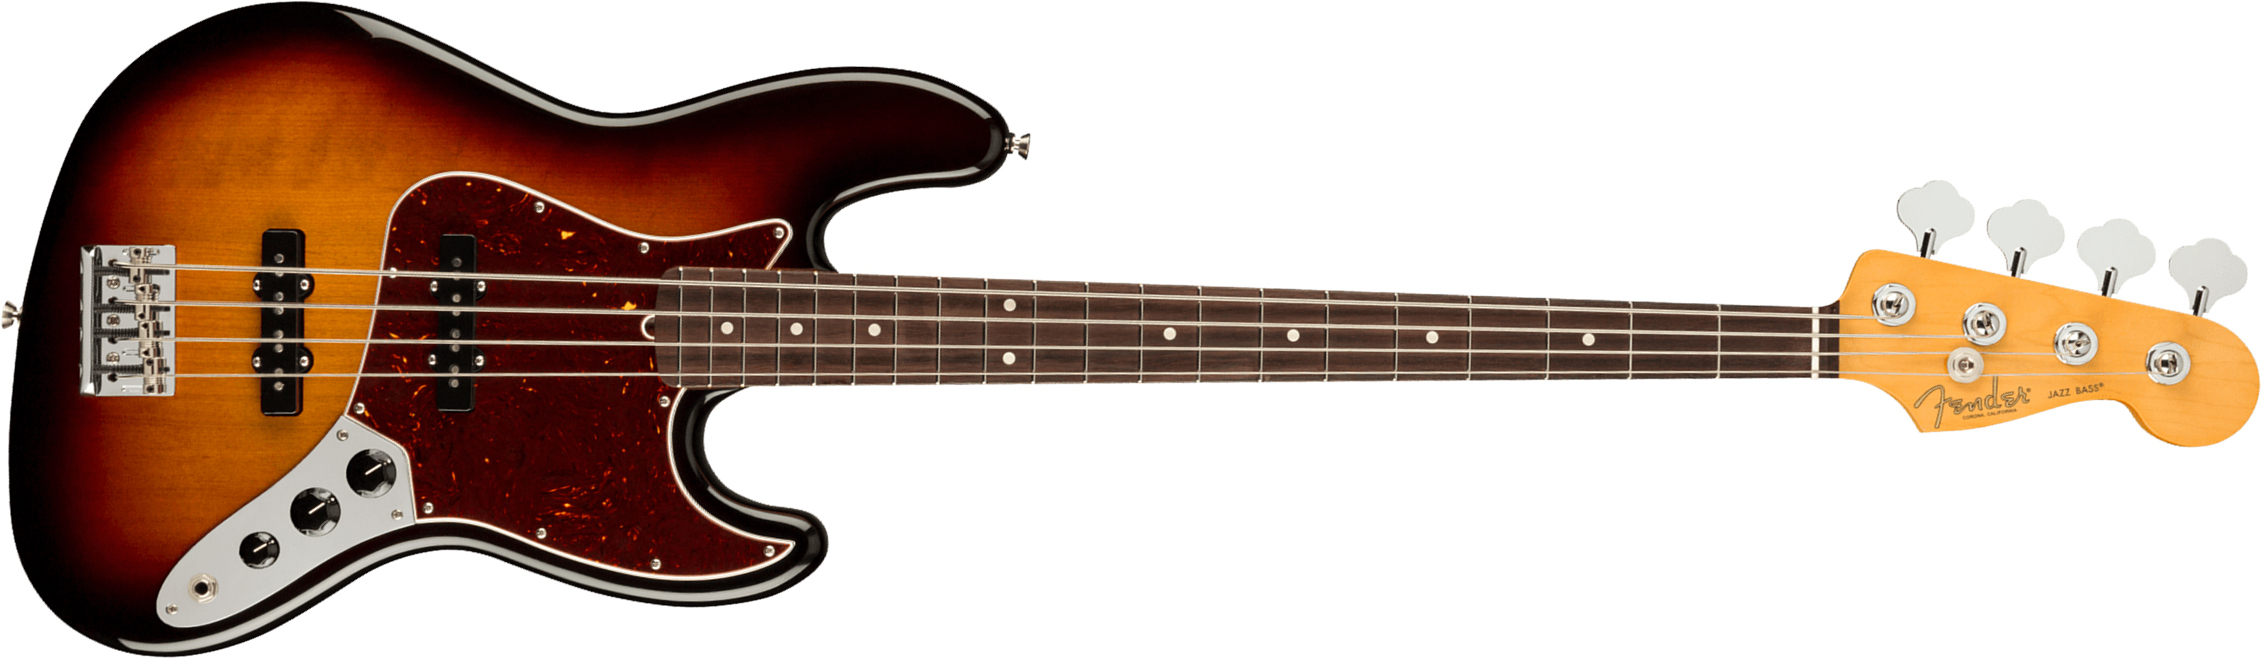 Fender Jazz Bass American Professional Ii Usa Rw - 3-color Sunburst - Solid body electric bass - Main picture